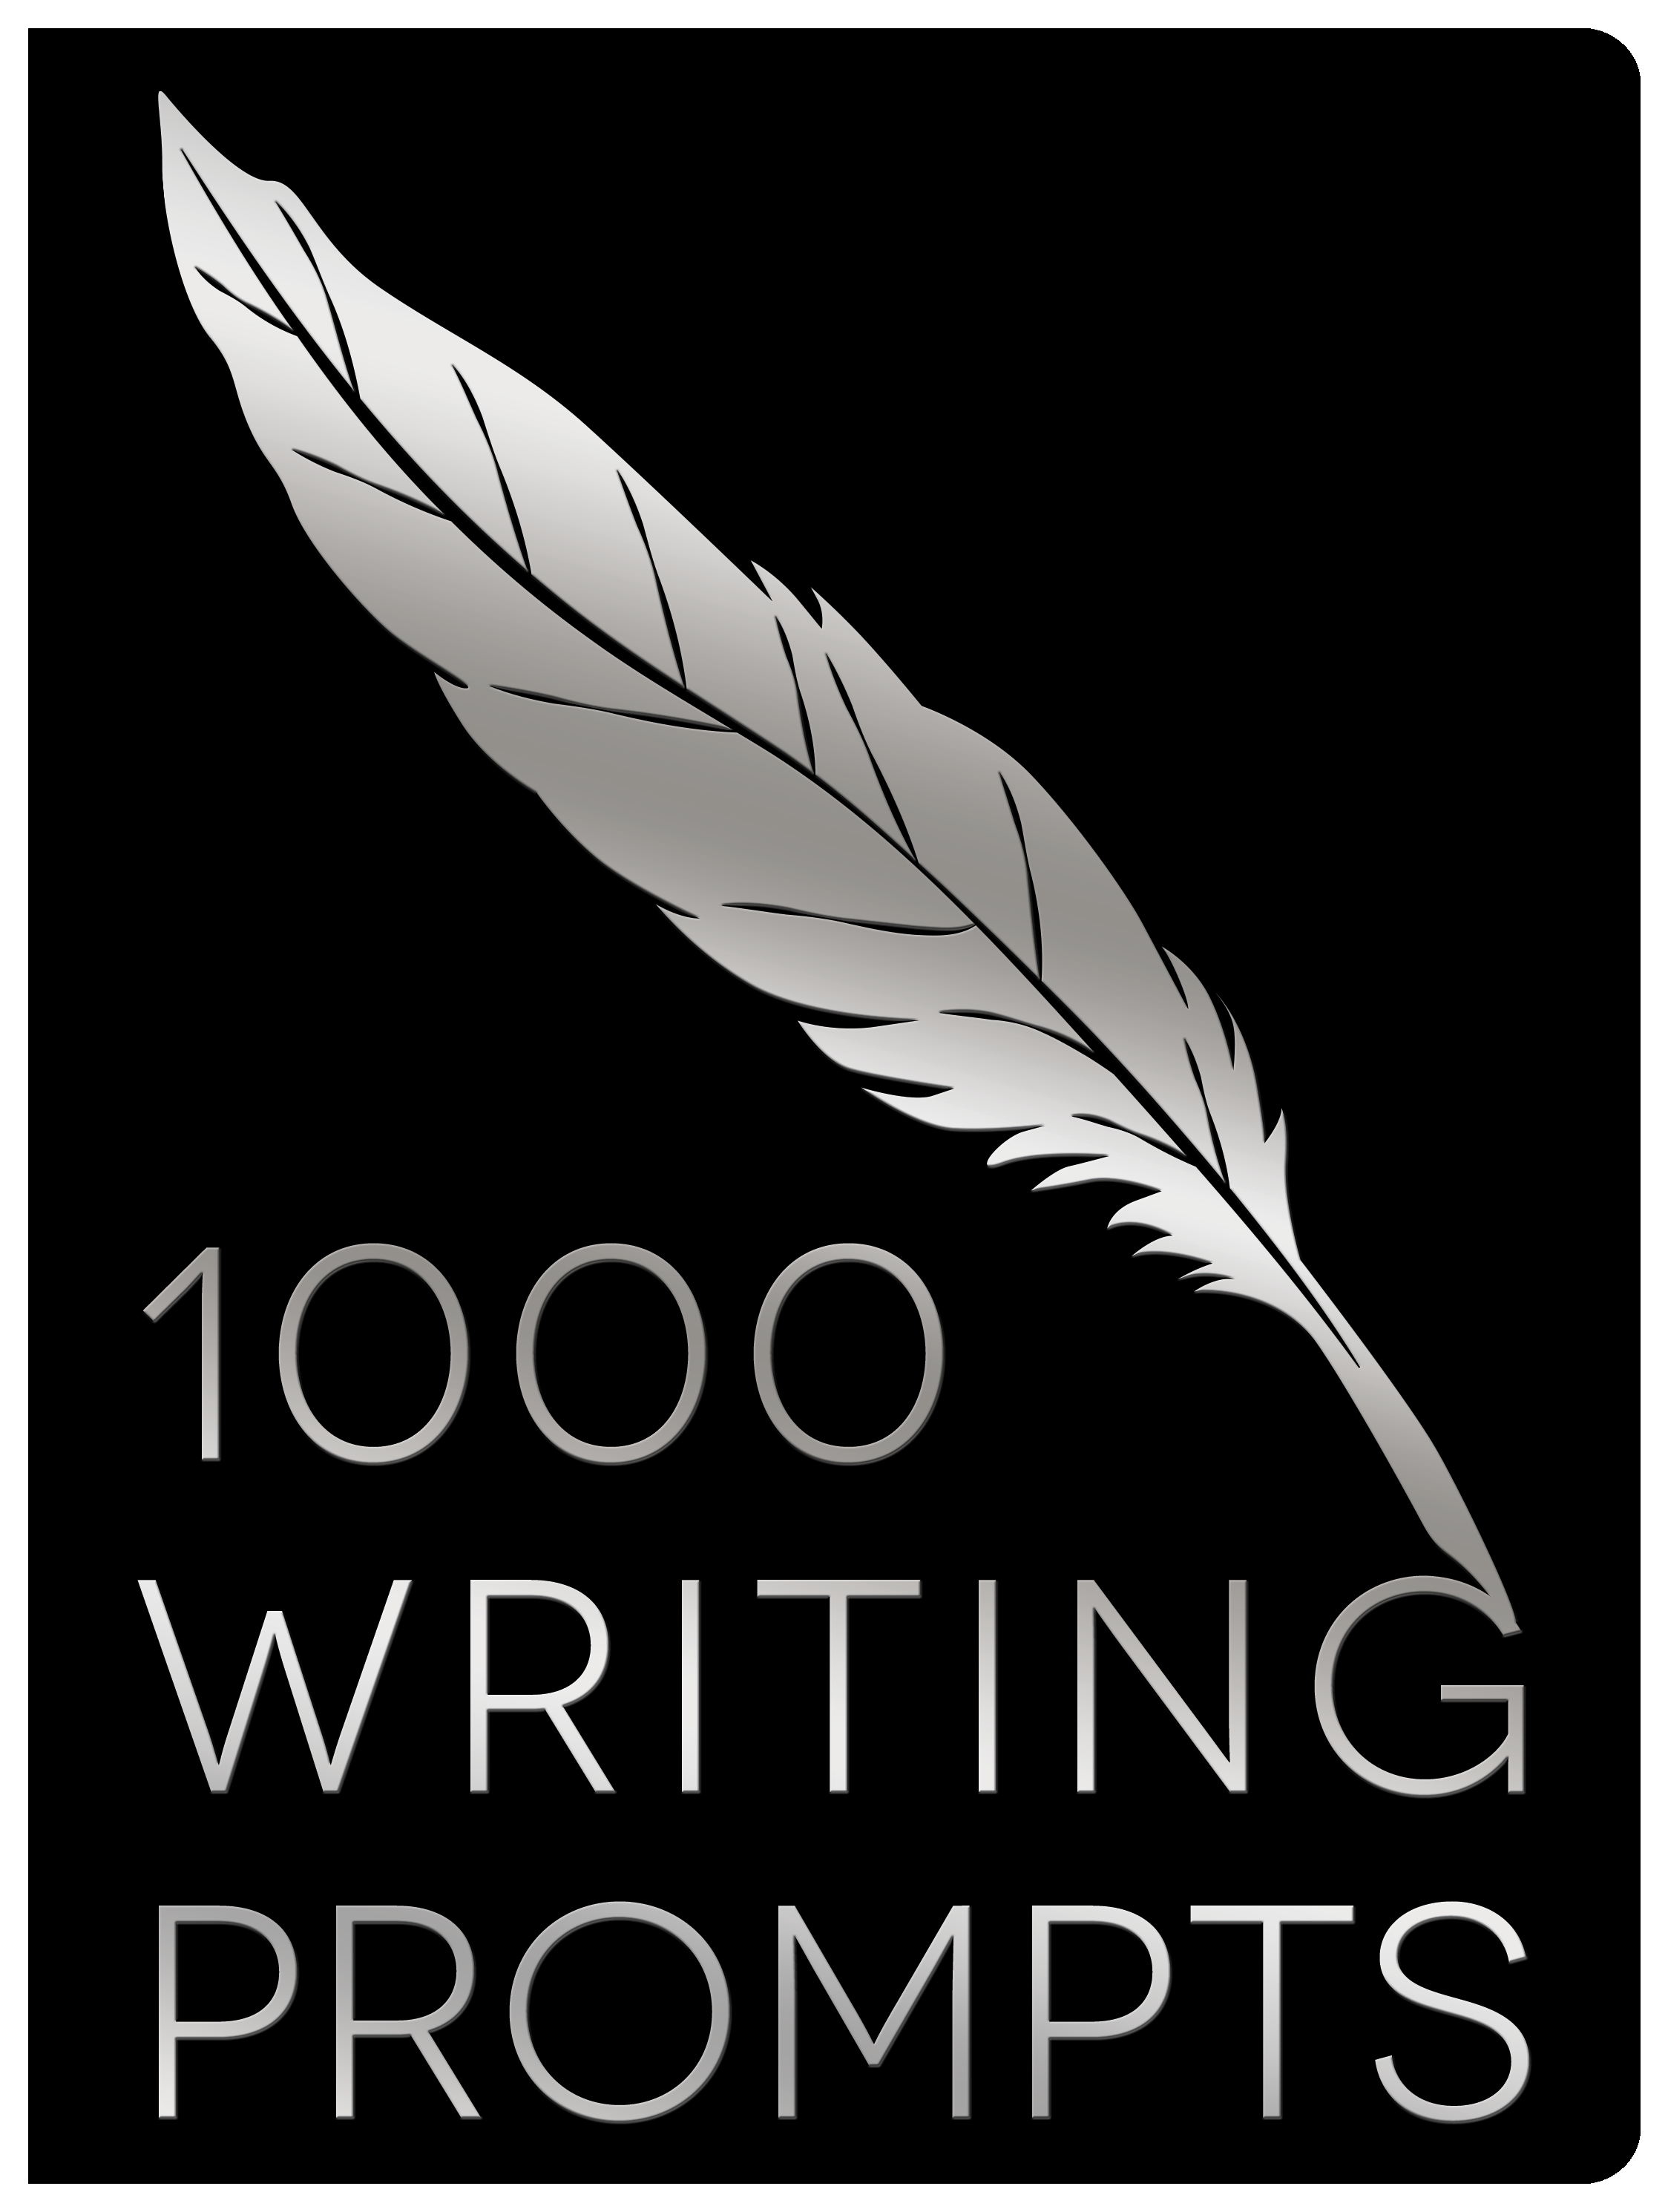 1000 Writing Prompts book cover